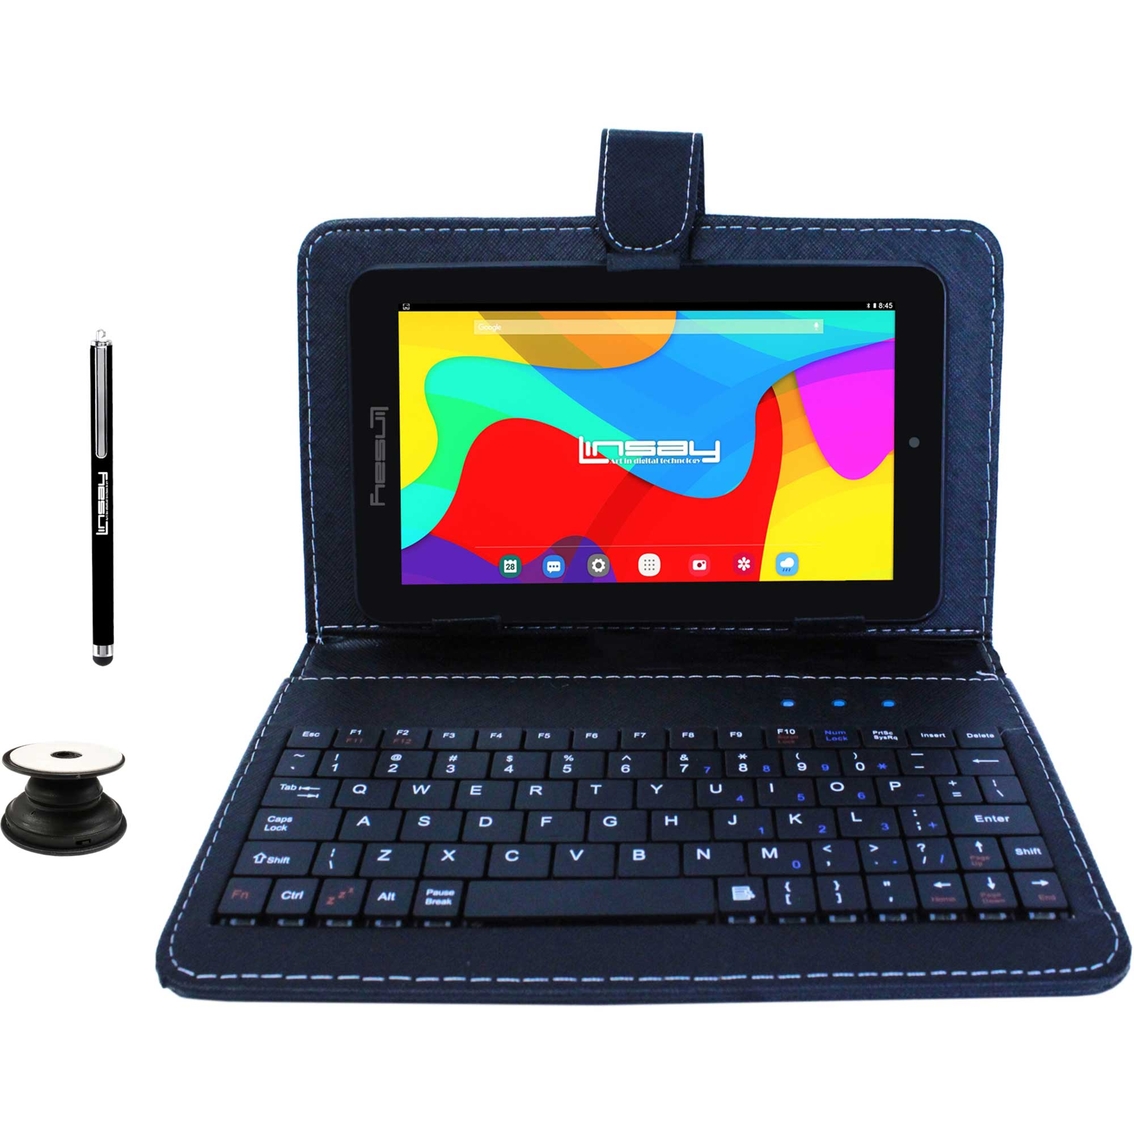 Linsay 7 in. 2GB RAM 32GB Tablet with Keyboard, Backpack, Holder and Pen - Image 2 of 3